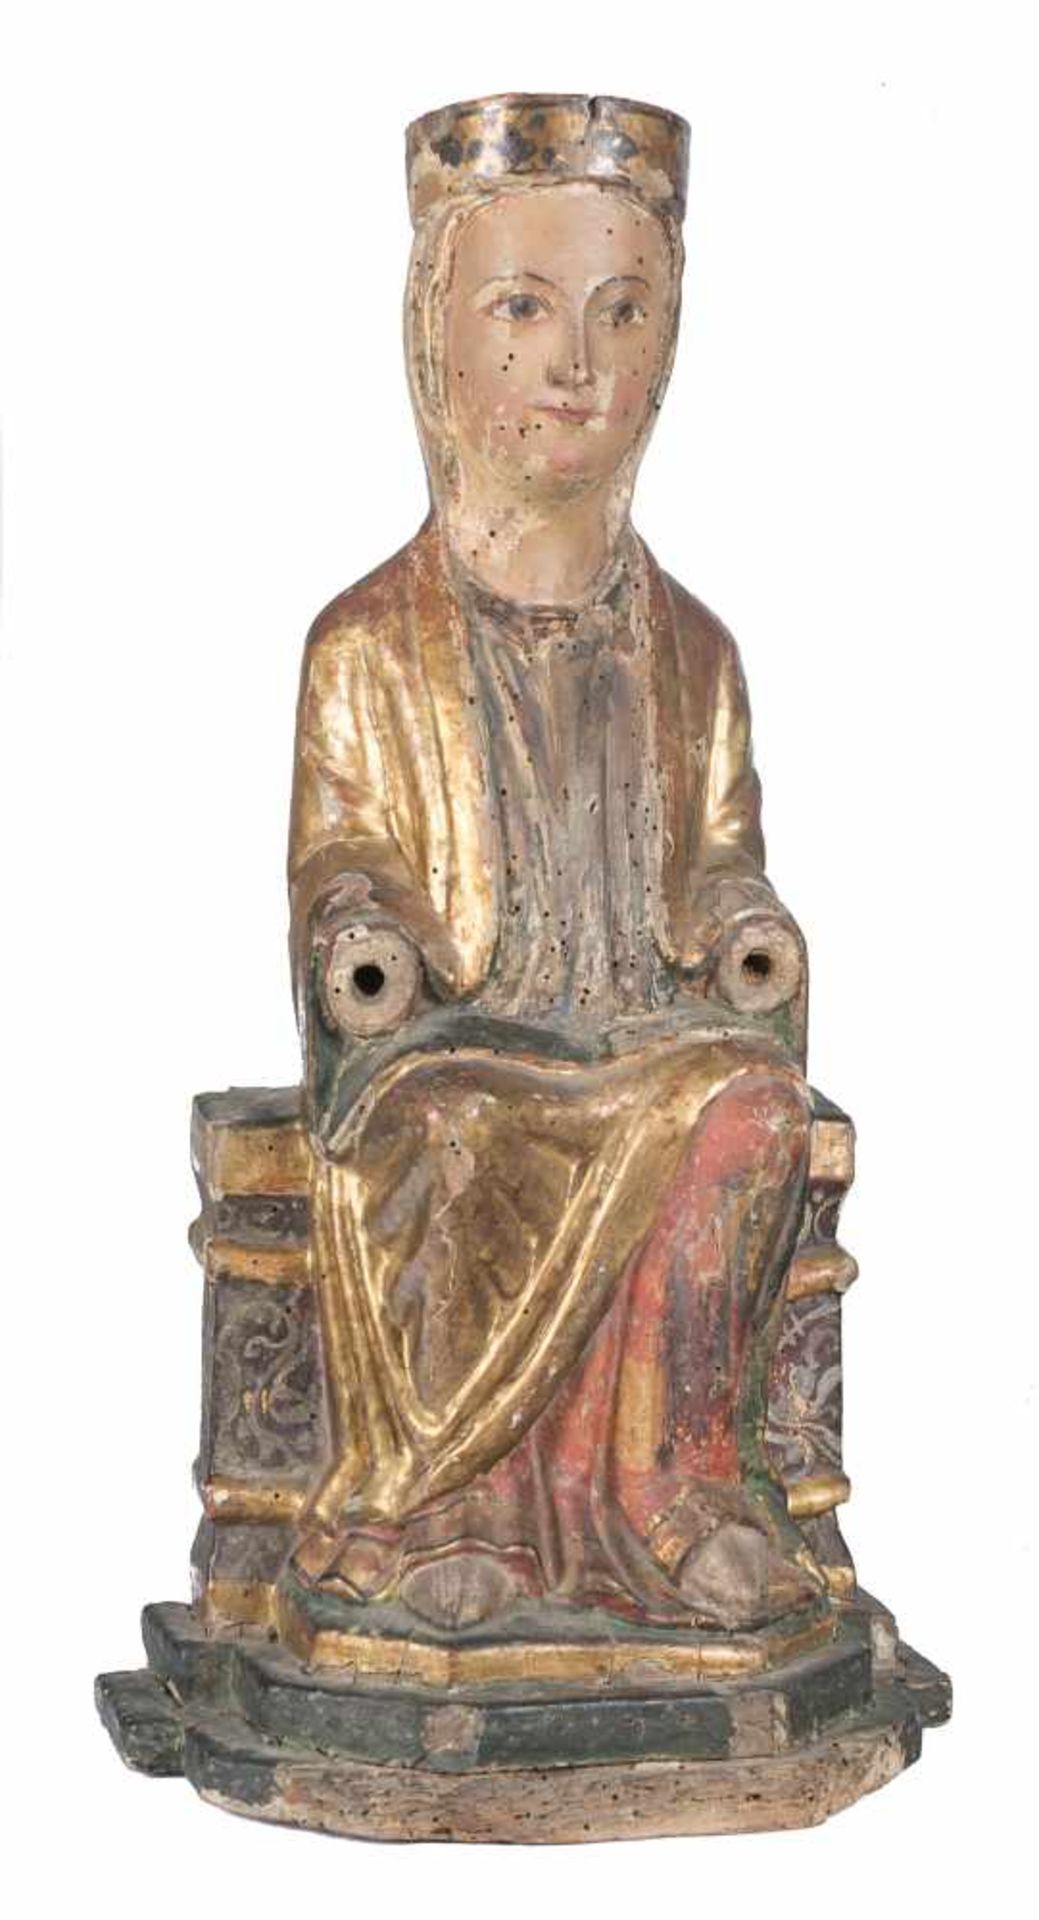 "Seat of Wisdom (Sedes Sapientiae)". Carved and polychromed wooden sculpture. Romanesque. 13th